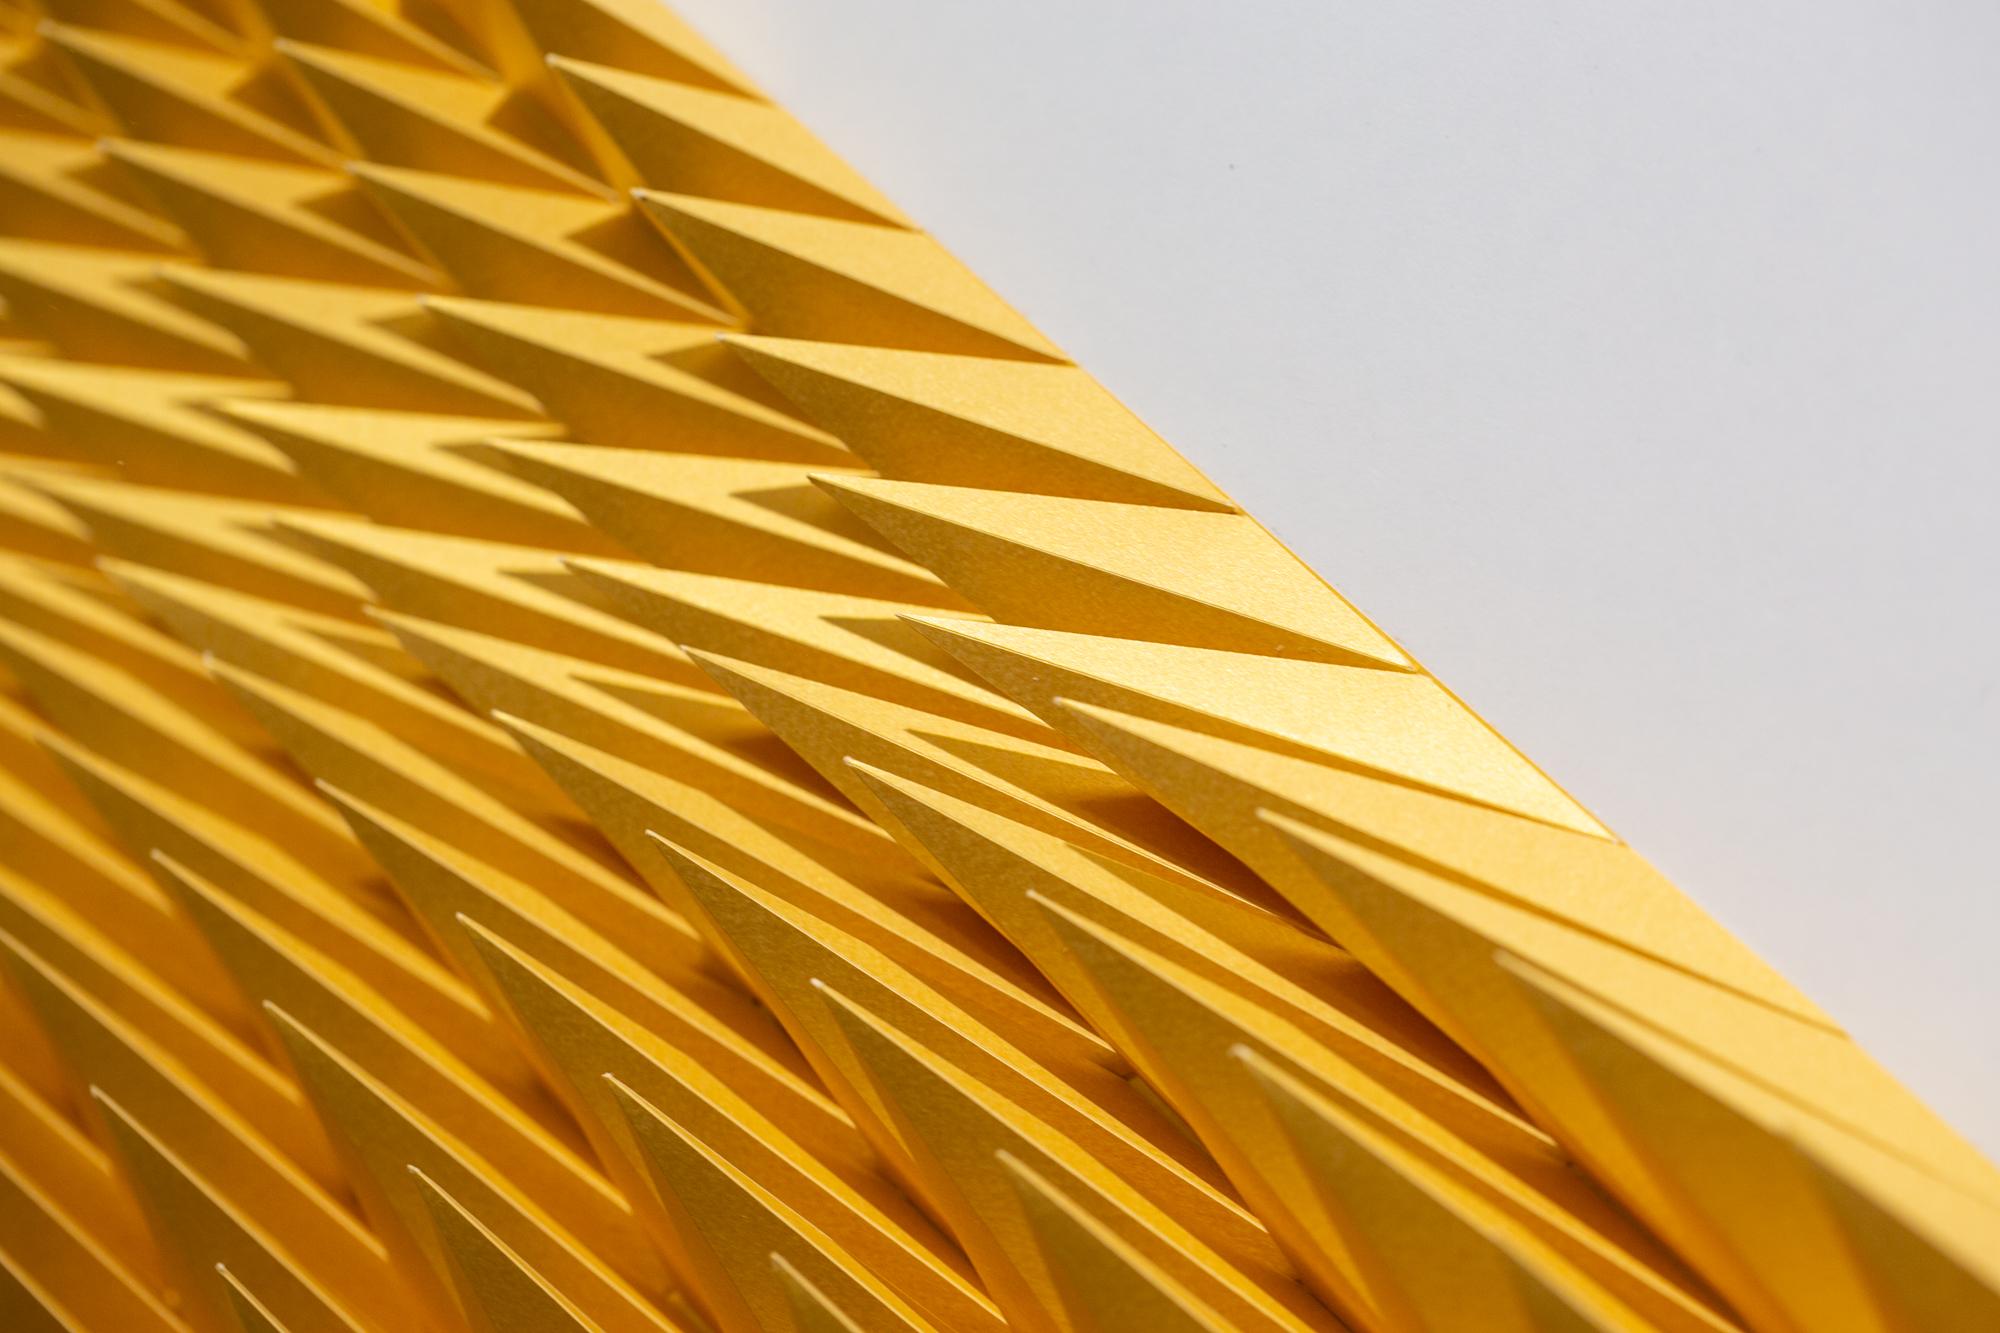 This gold orange wall-hanging sculpture titled 